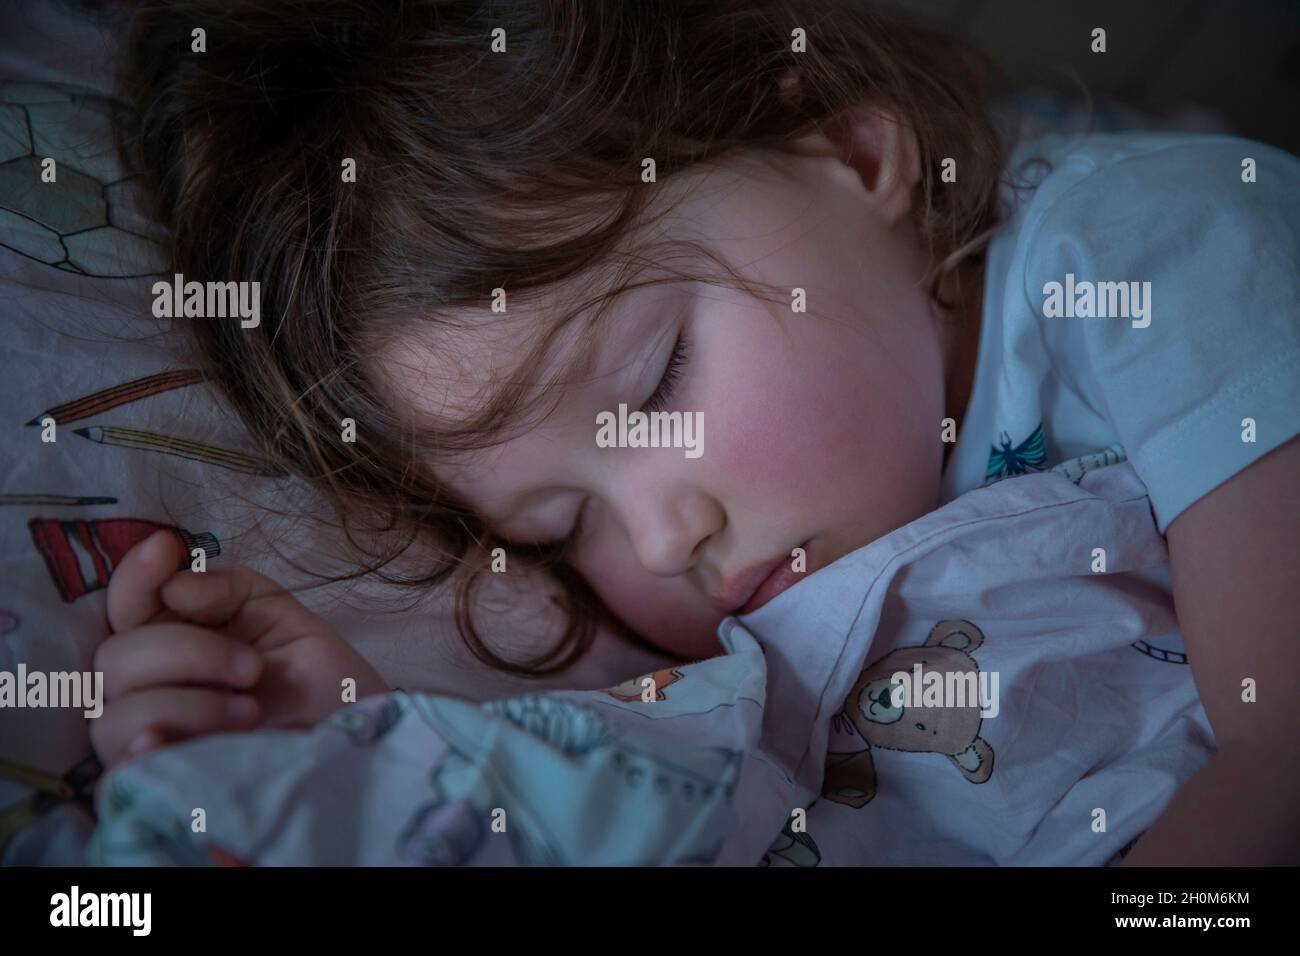 Cute 3 years old baby girl sleeping in her bed Stock Photo